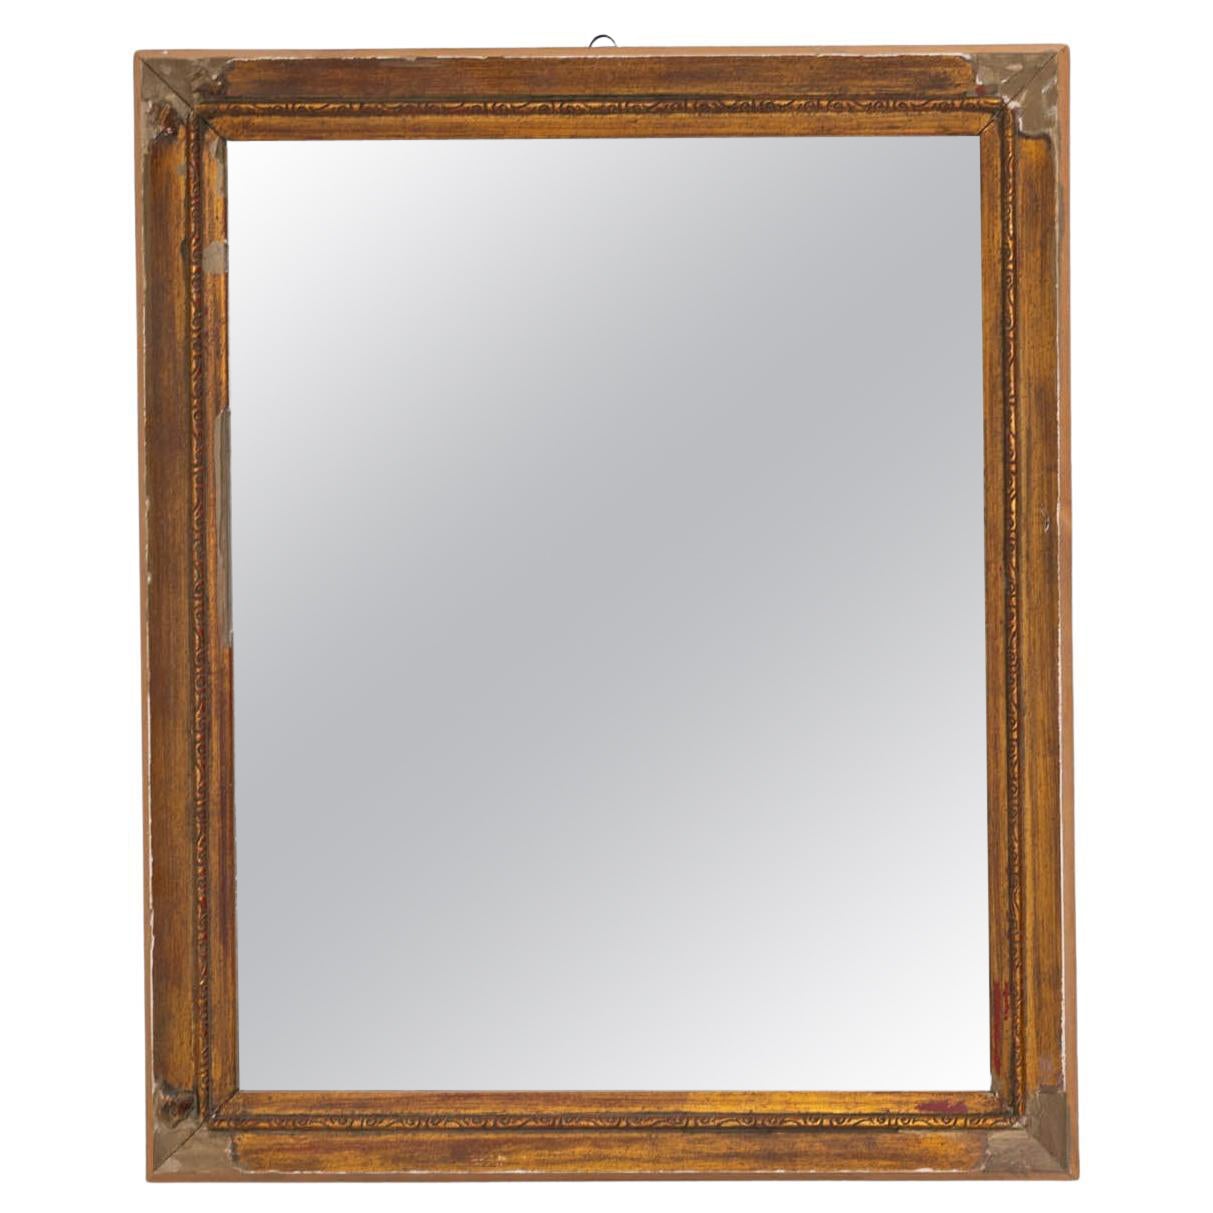 Early 20th Century French Gilded Wooden Mirror